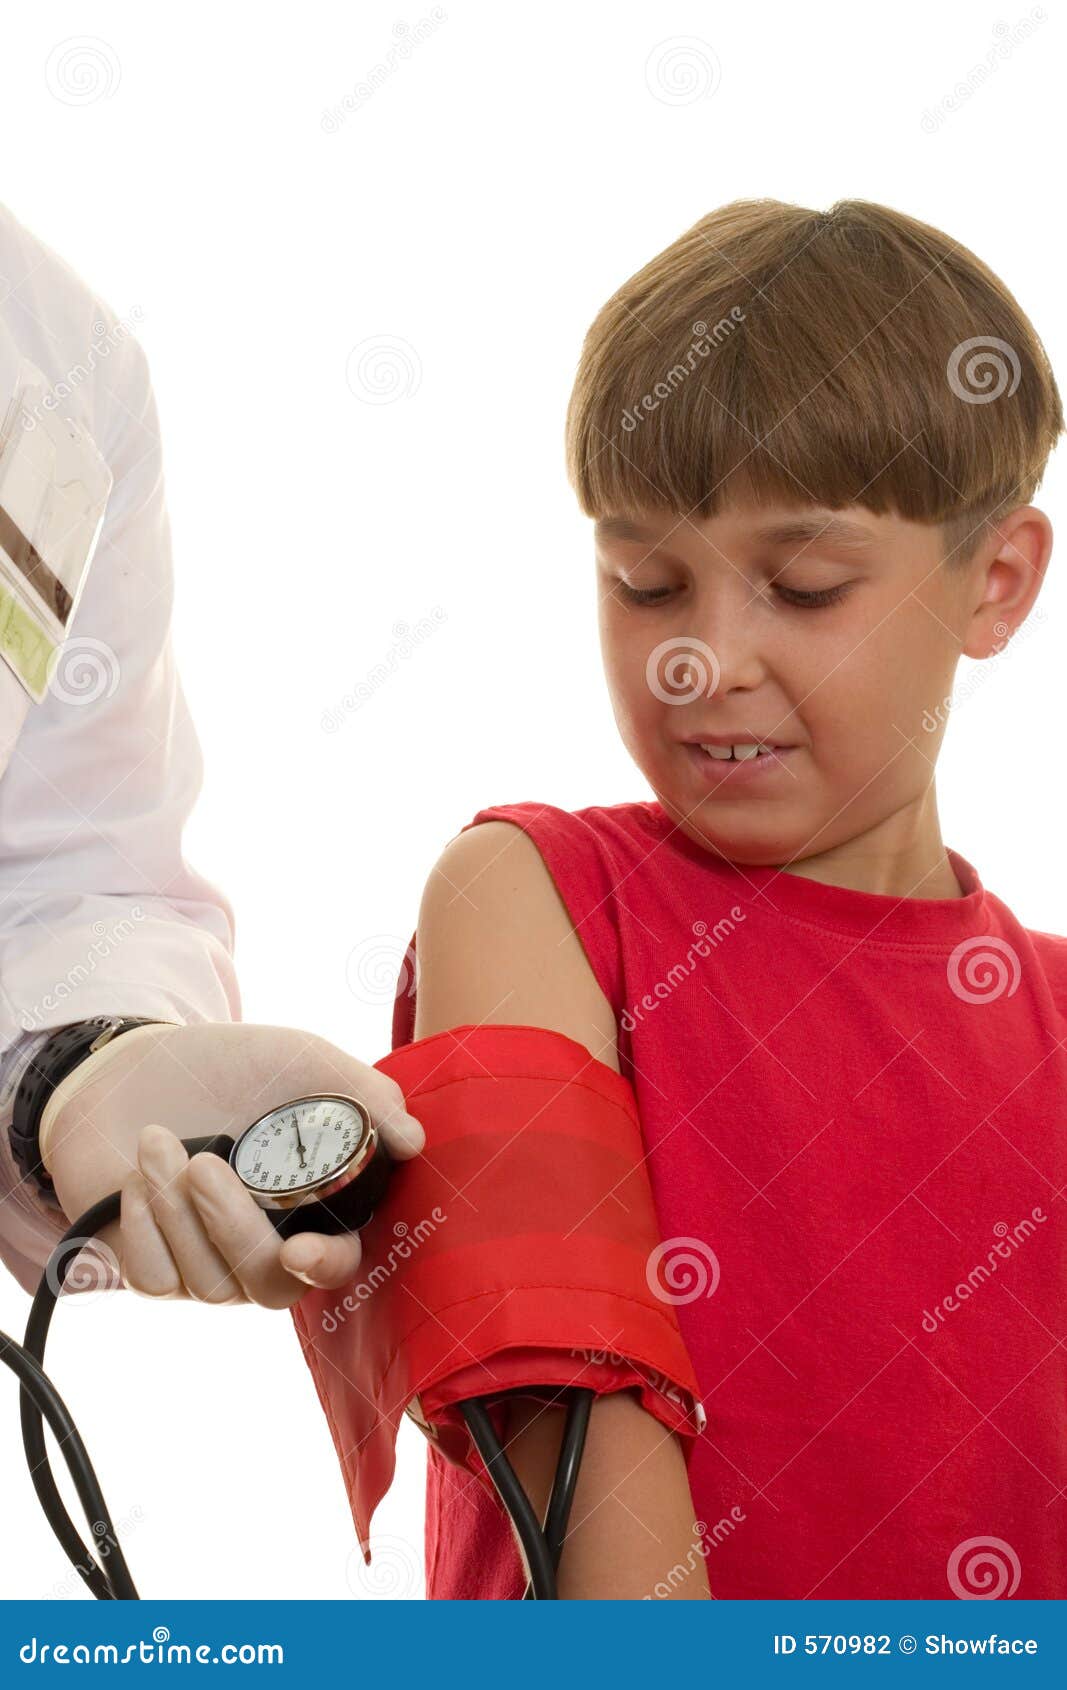 1+ Hundred Child Blood Pressure Cuff Royalty-Free Images, Stock Photos &  Pictures